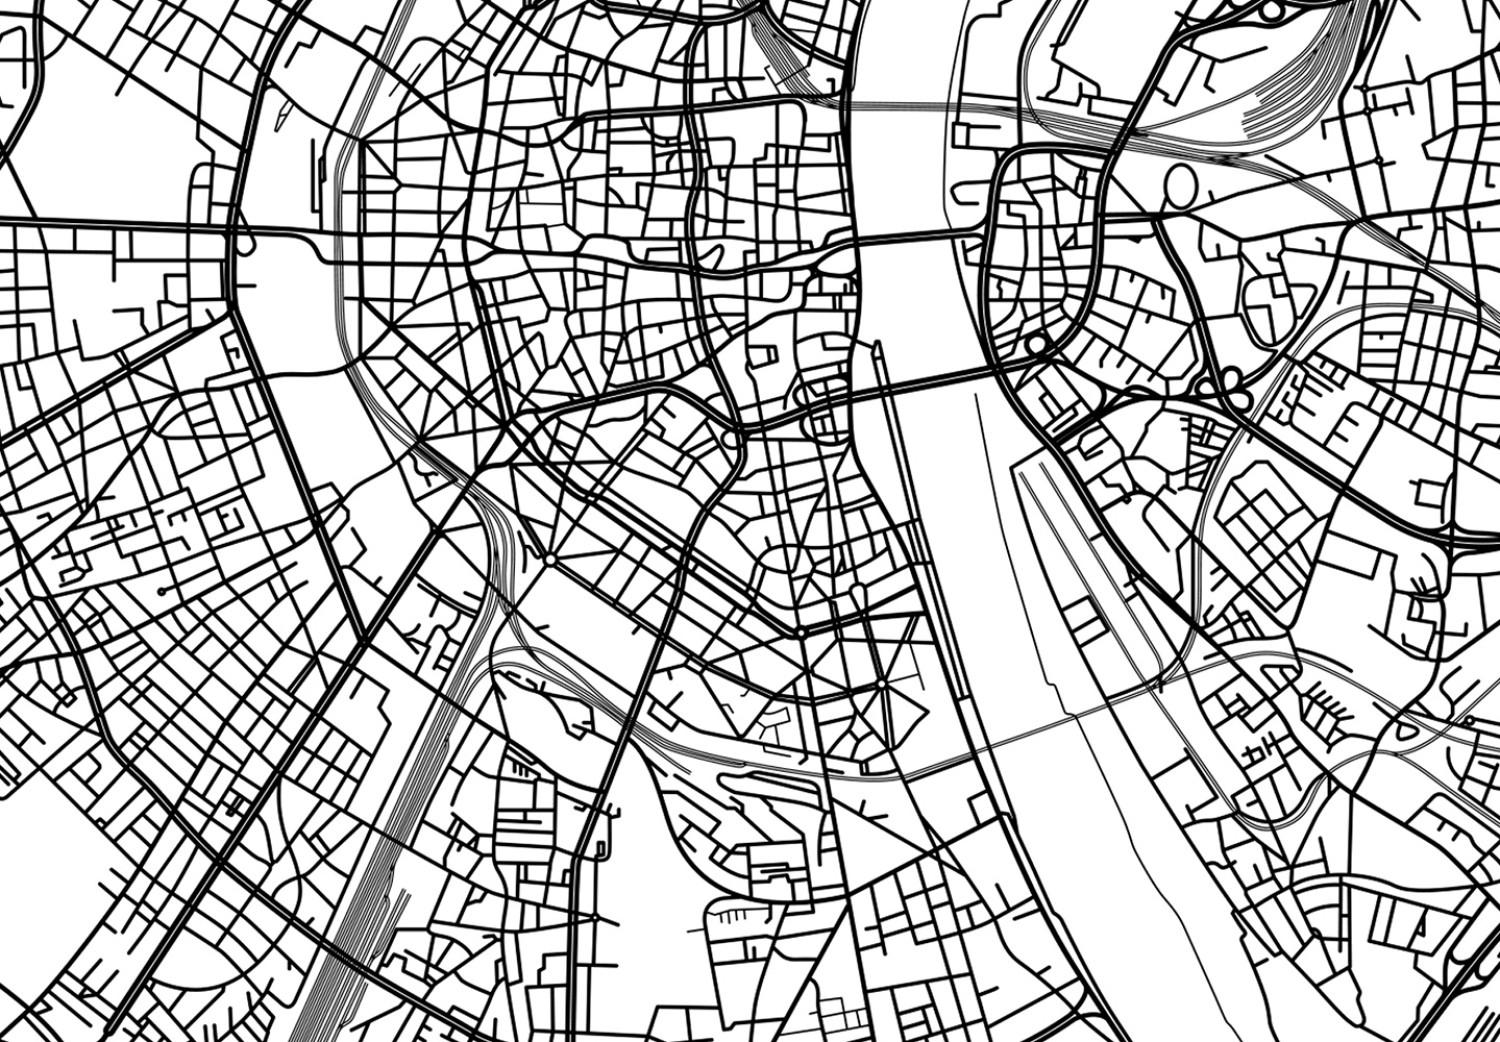 Canvas Cologne - black and white aerial map of the German city